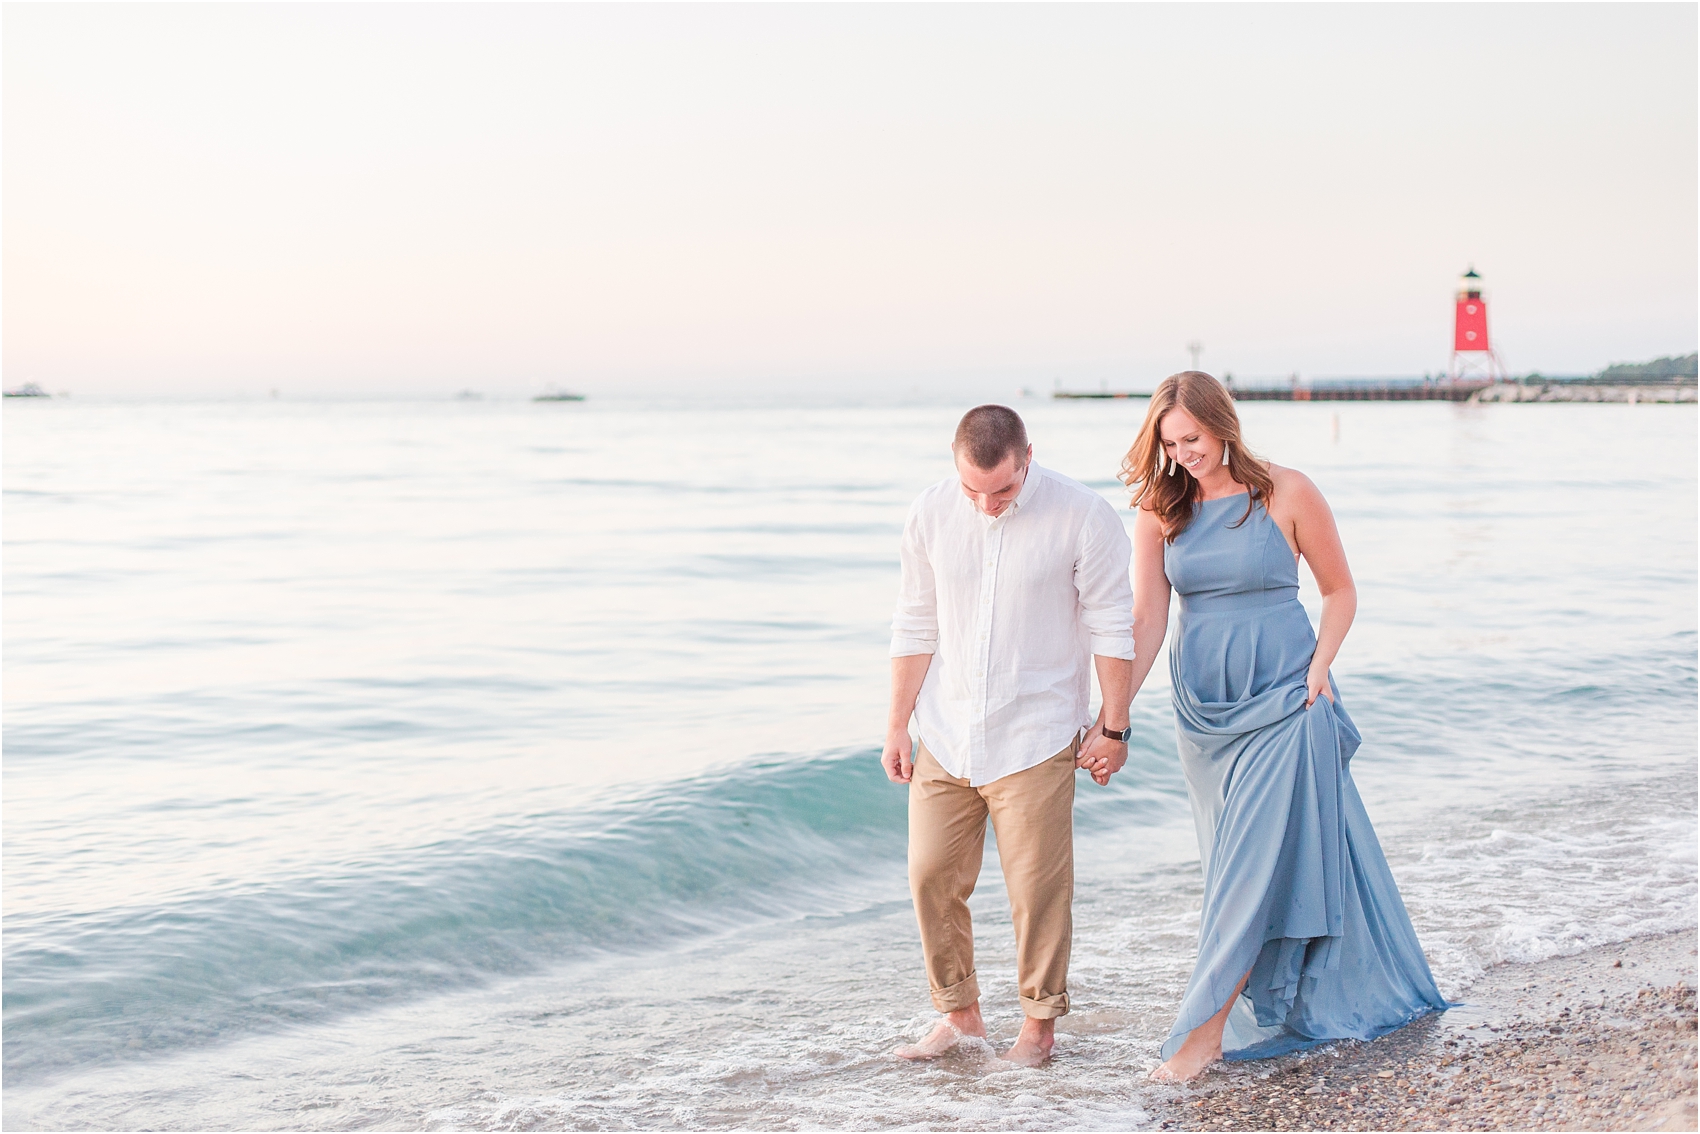 romantic-sunset-engagement-photos-at-michigan-beach-park-in-charlevoix-mi-by-courtney-carolyn-photography_0006.jpg